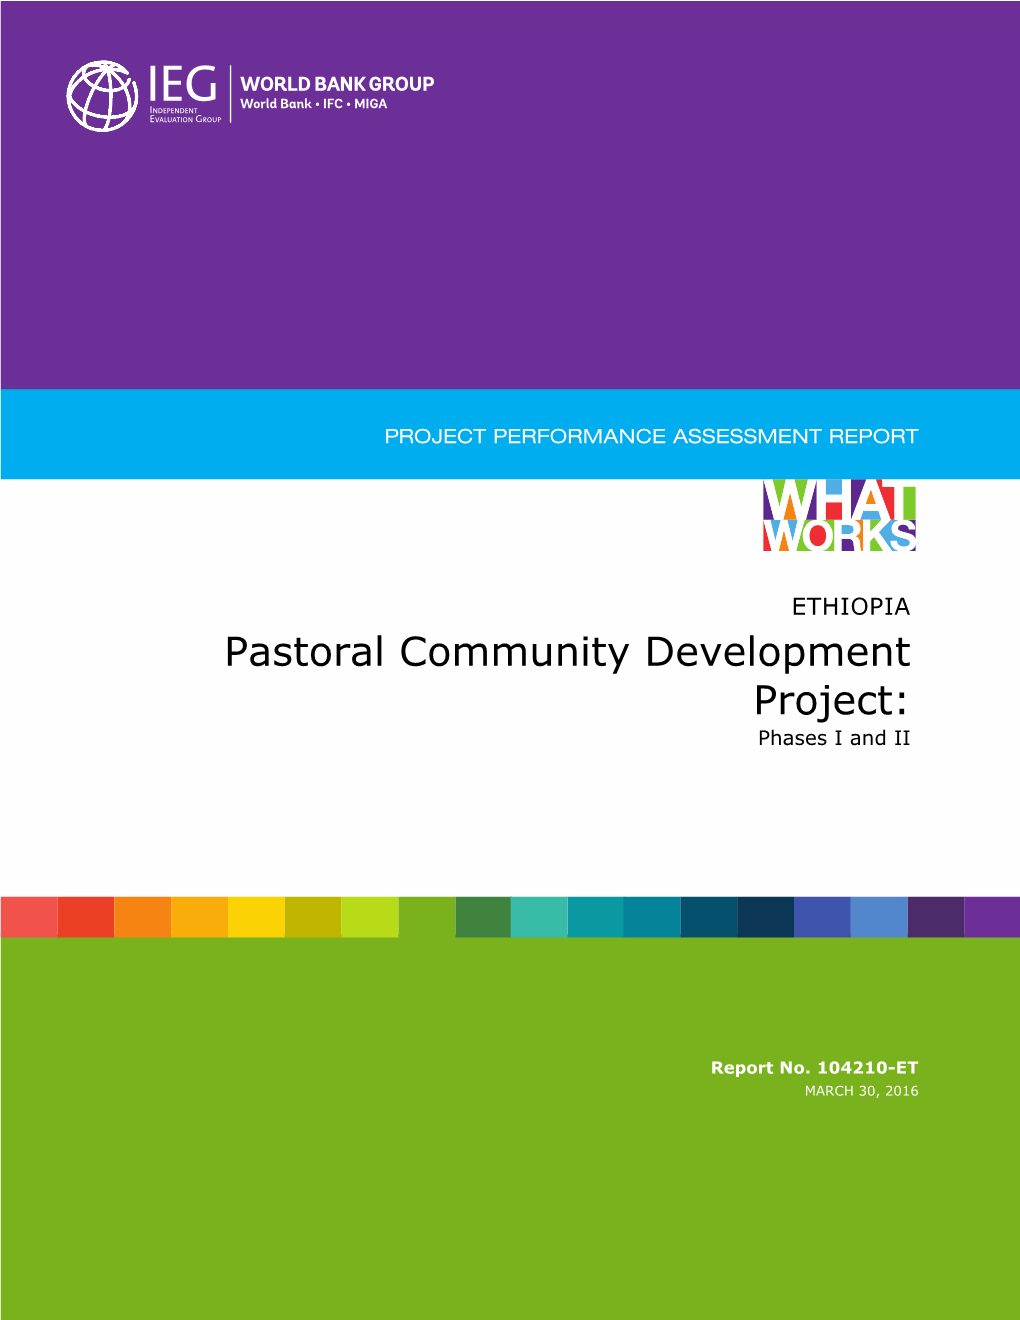 Pastoral Community Development Project: Phases I and II